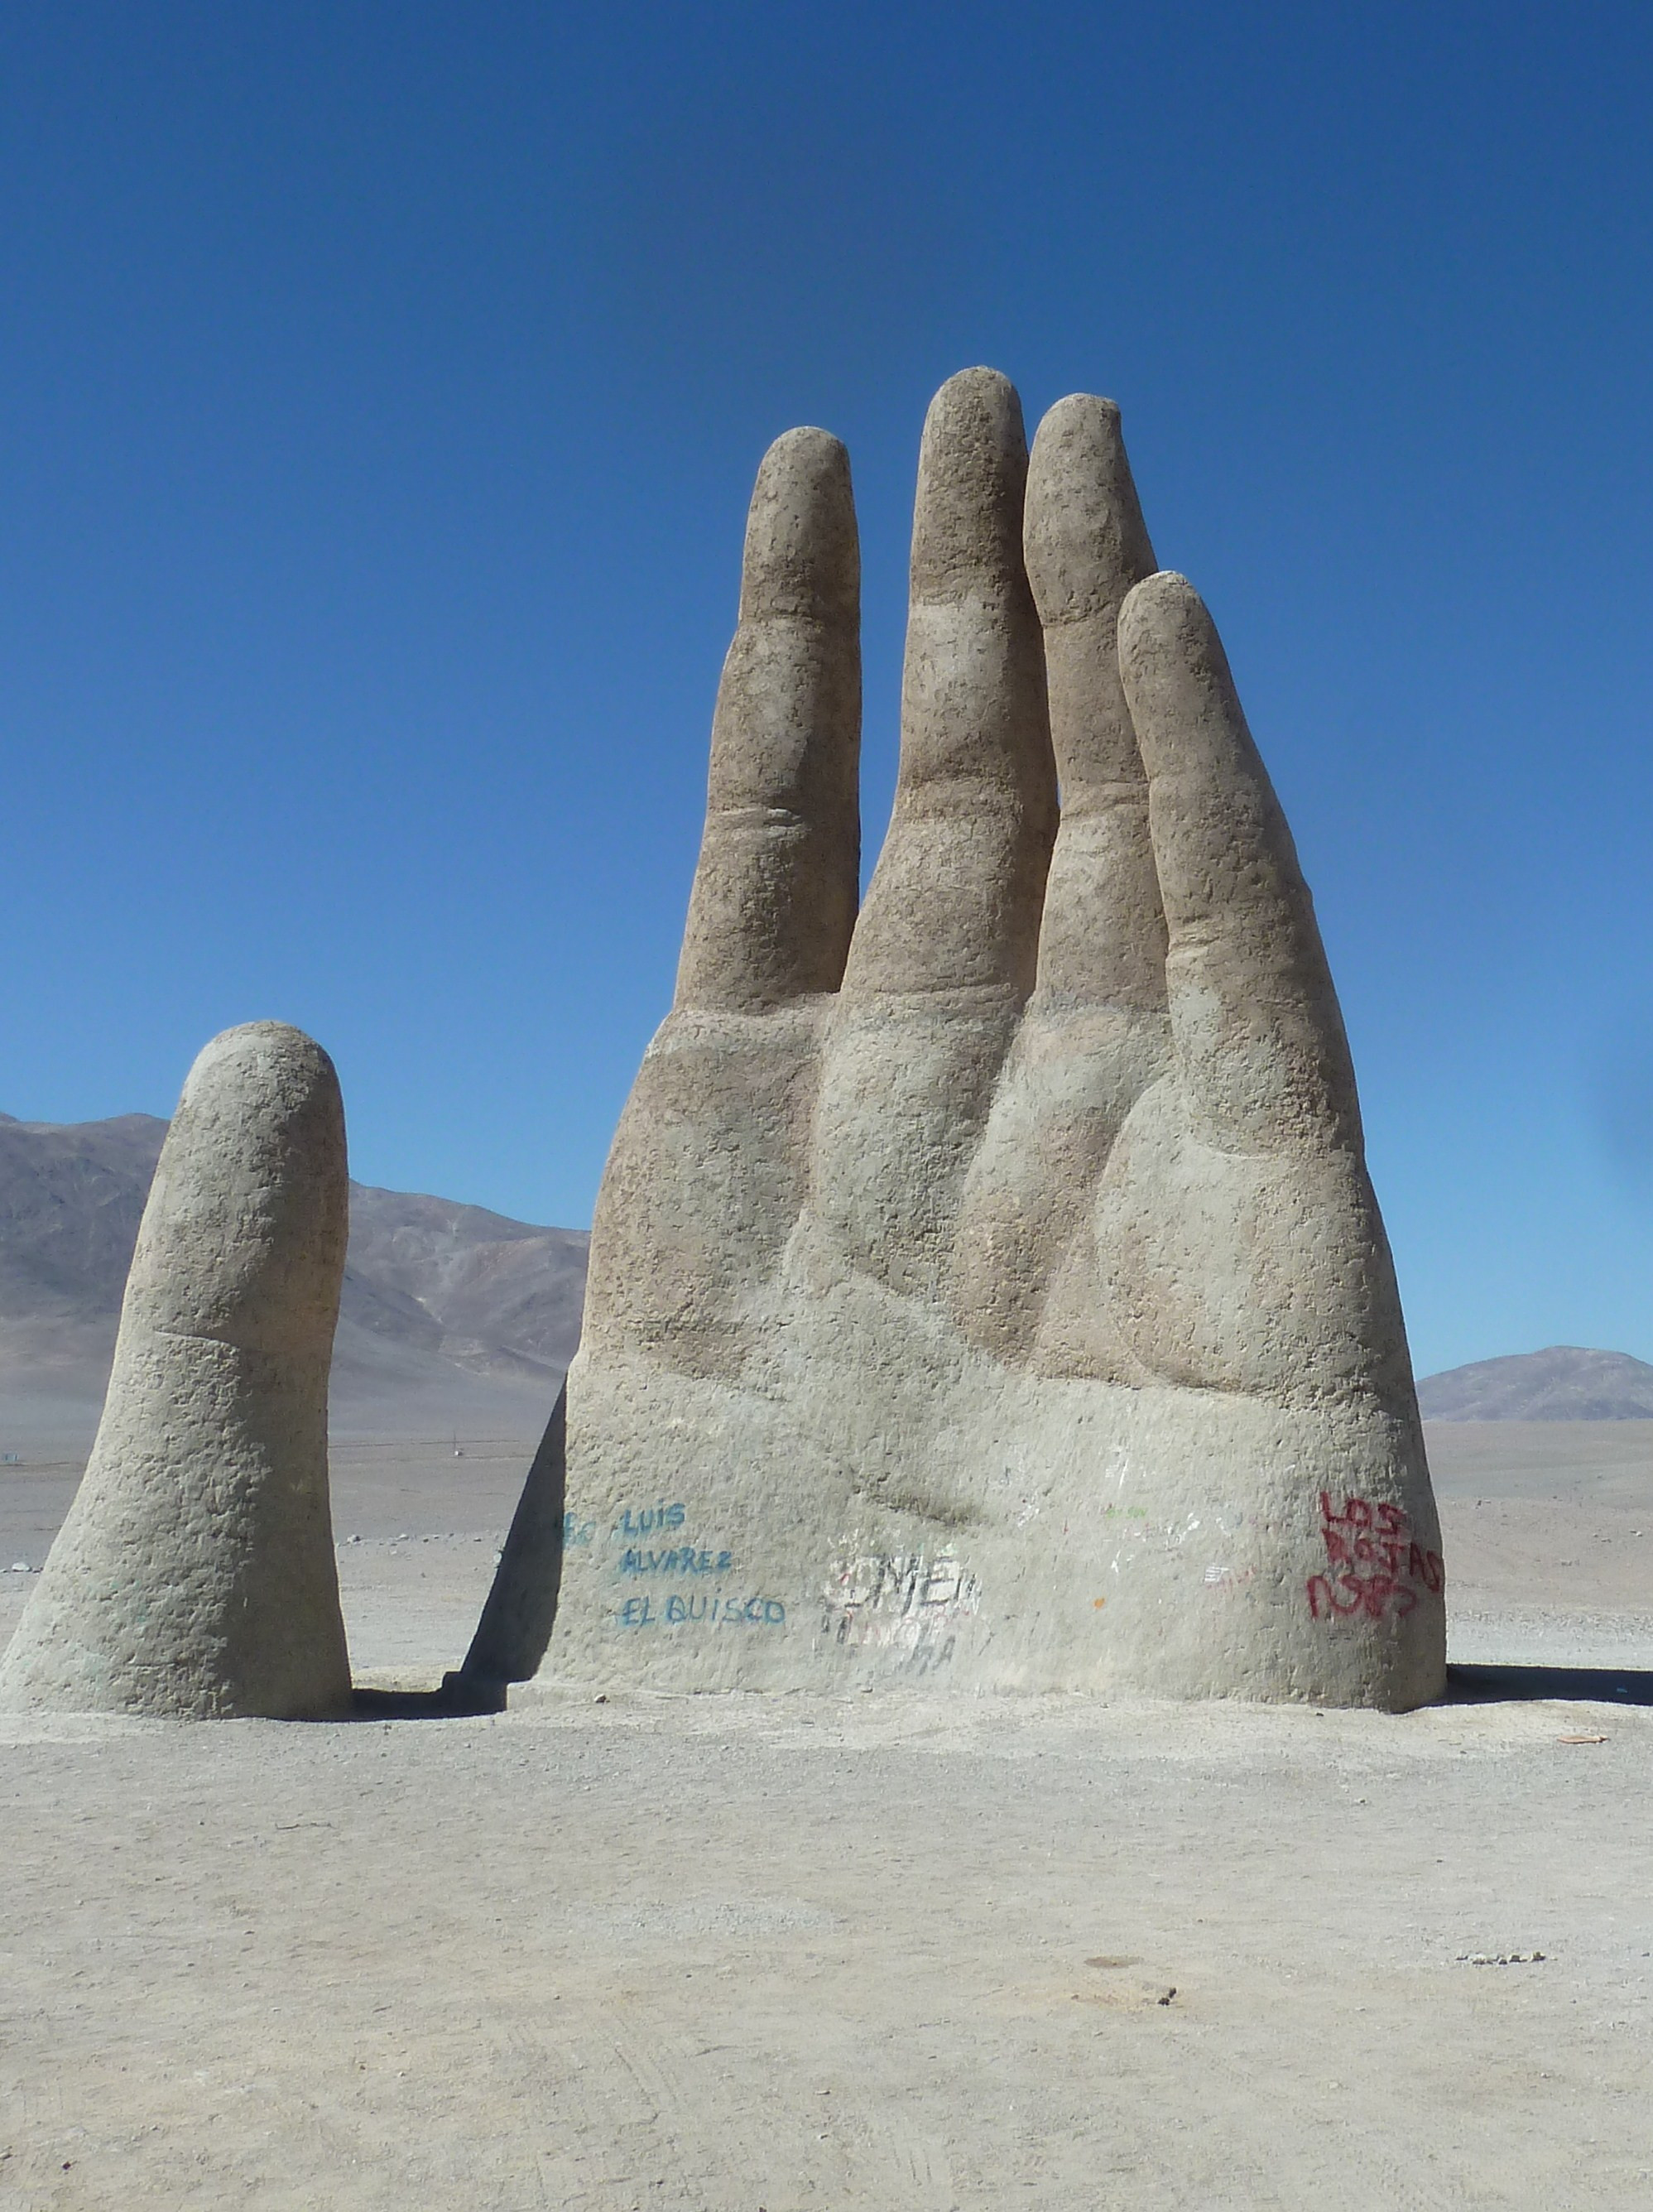 36-ft. sculpture by a Chilean artist shaped like a raised hand coming out of the deser